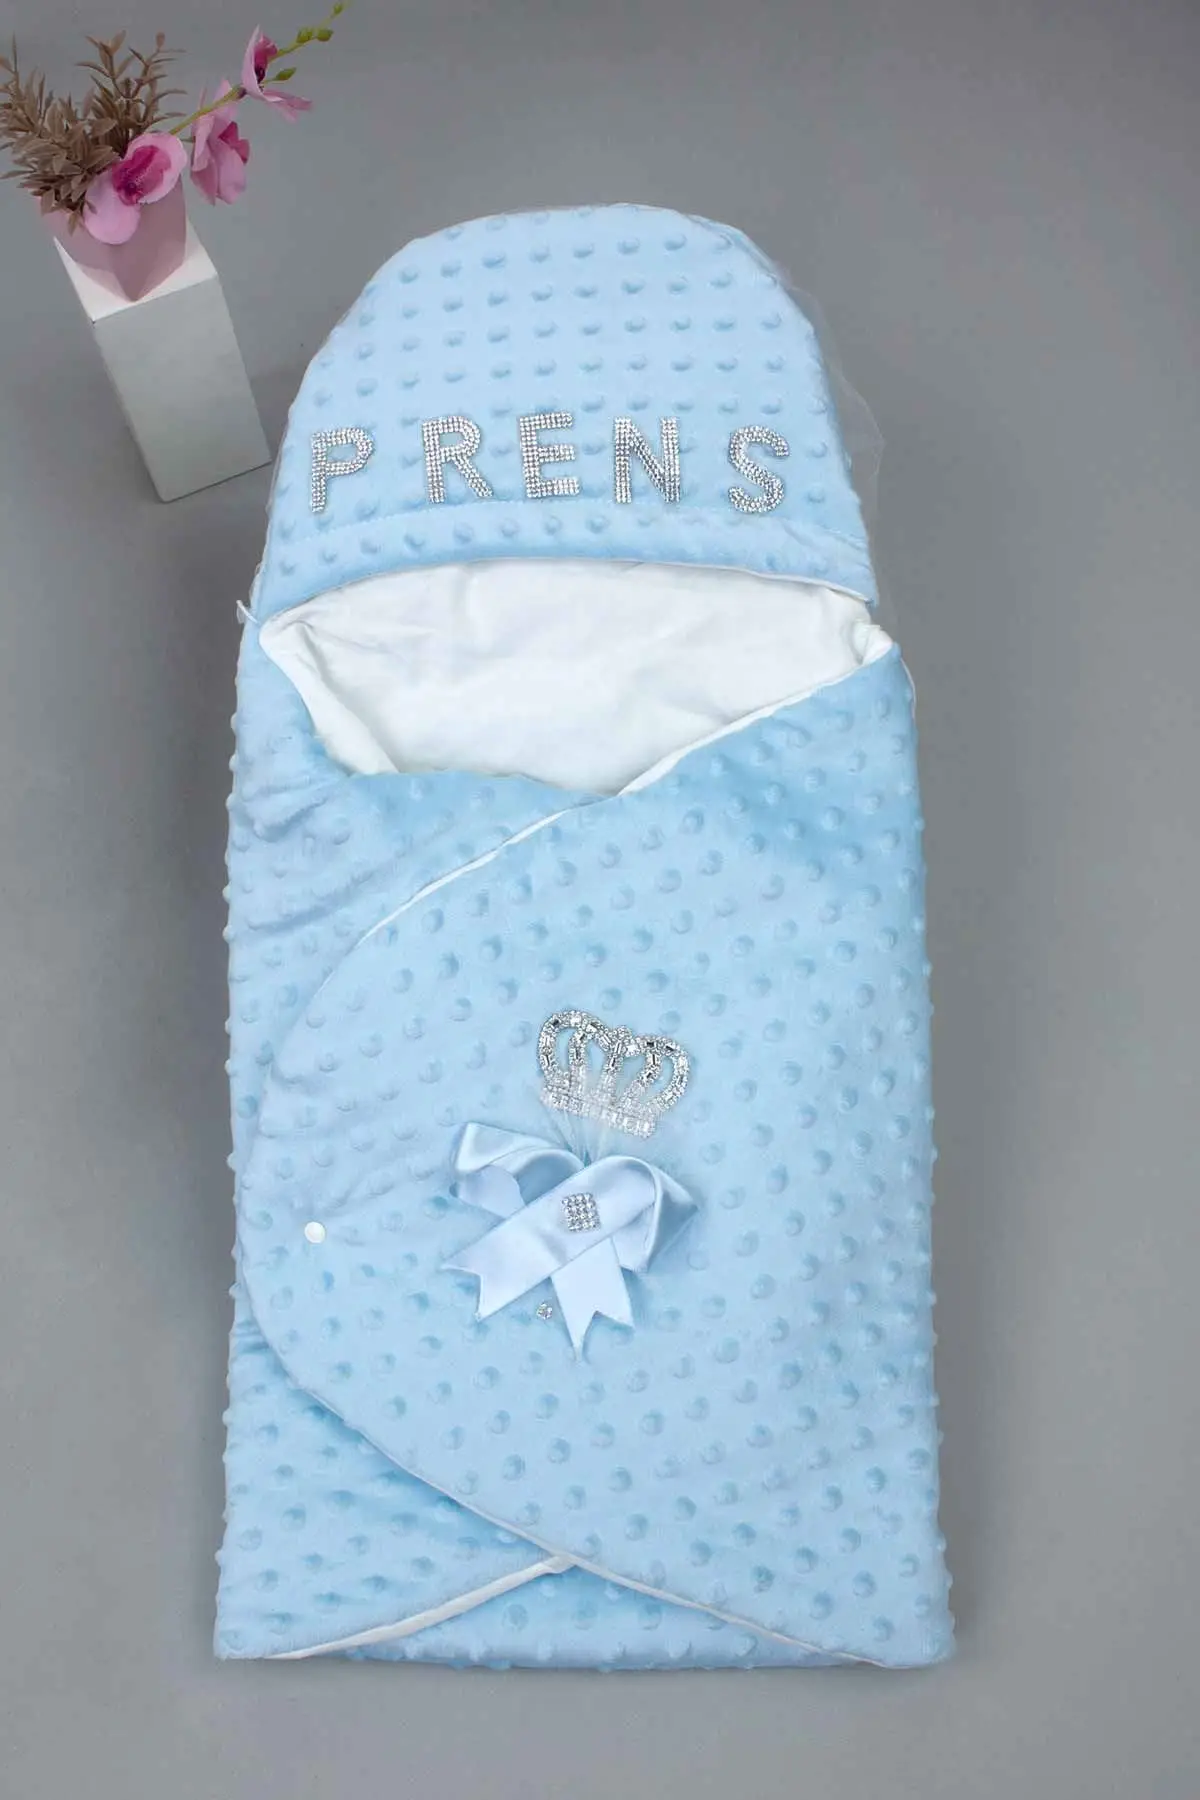 Blue Boy Baby Swaddle Newborn Male Babies Blanket Clothing Unisex Cotton Fabric Soft Baby Bedding Of SIDS Models